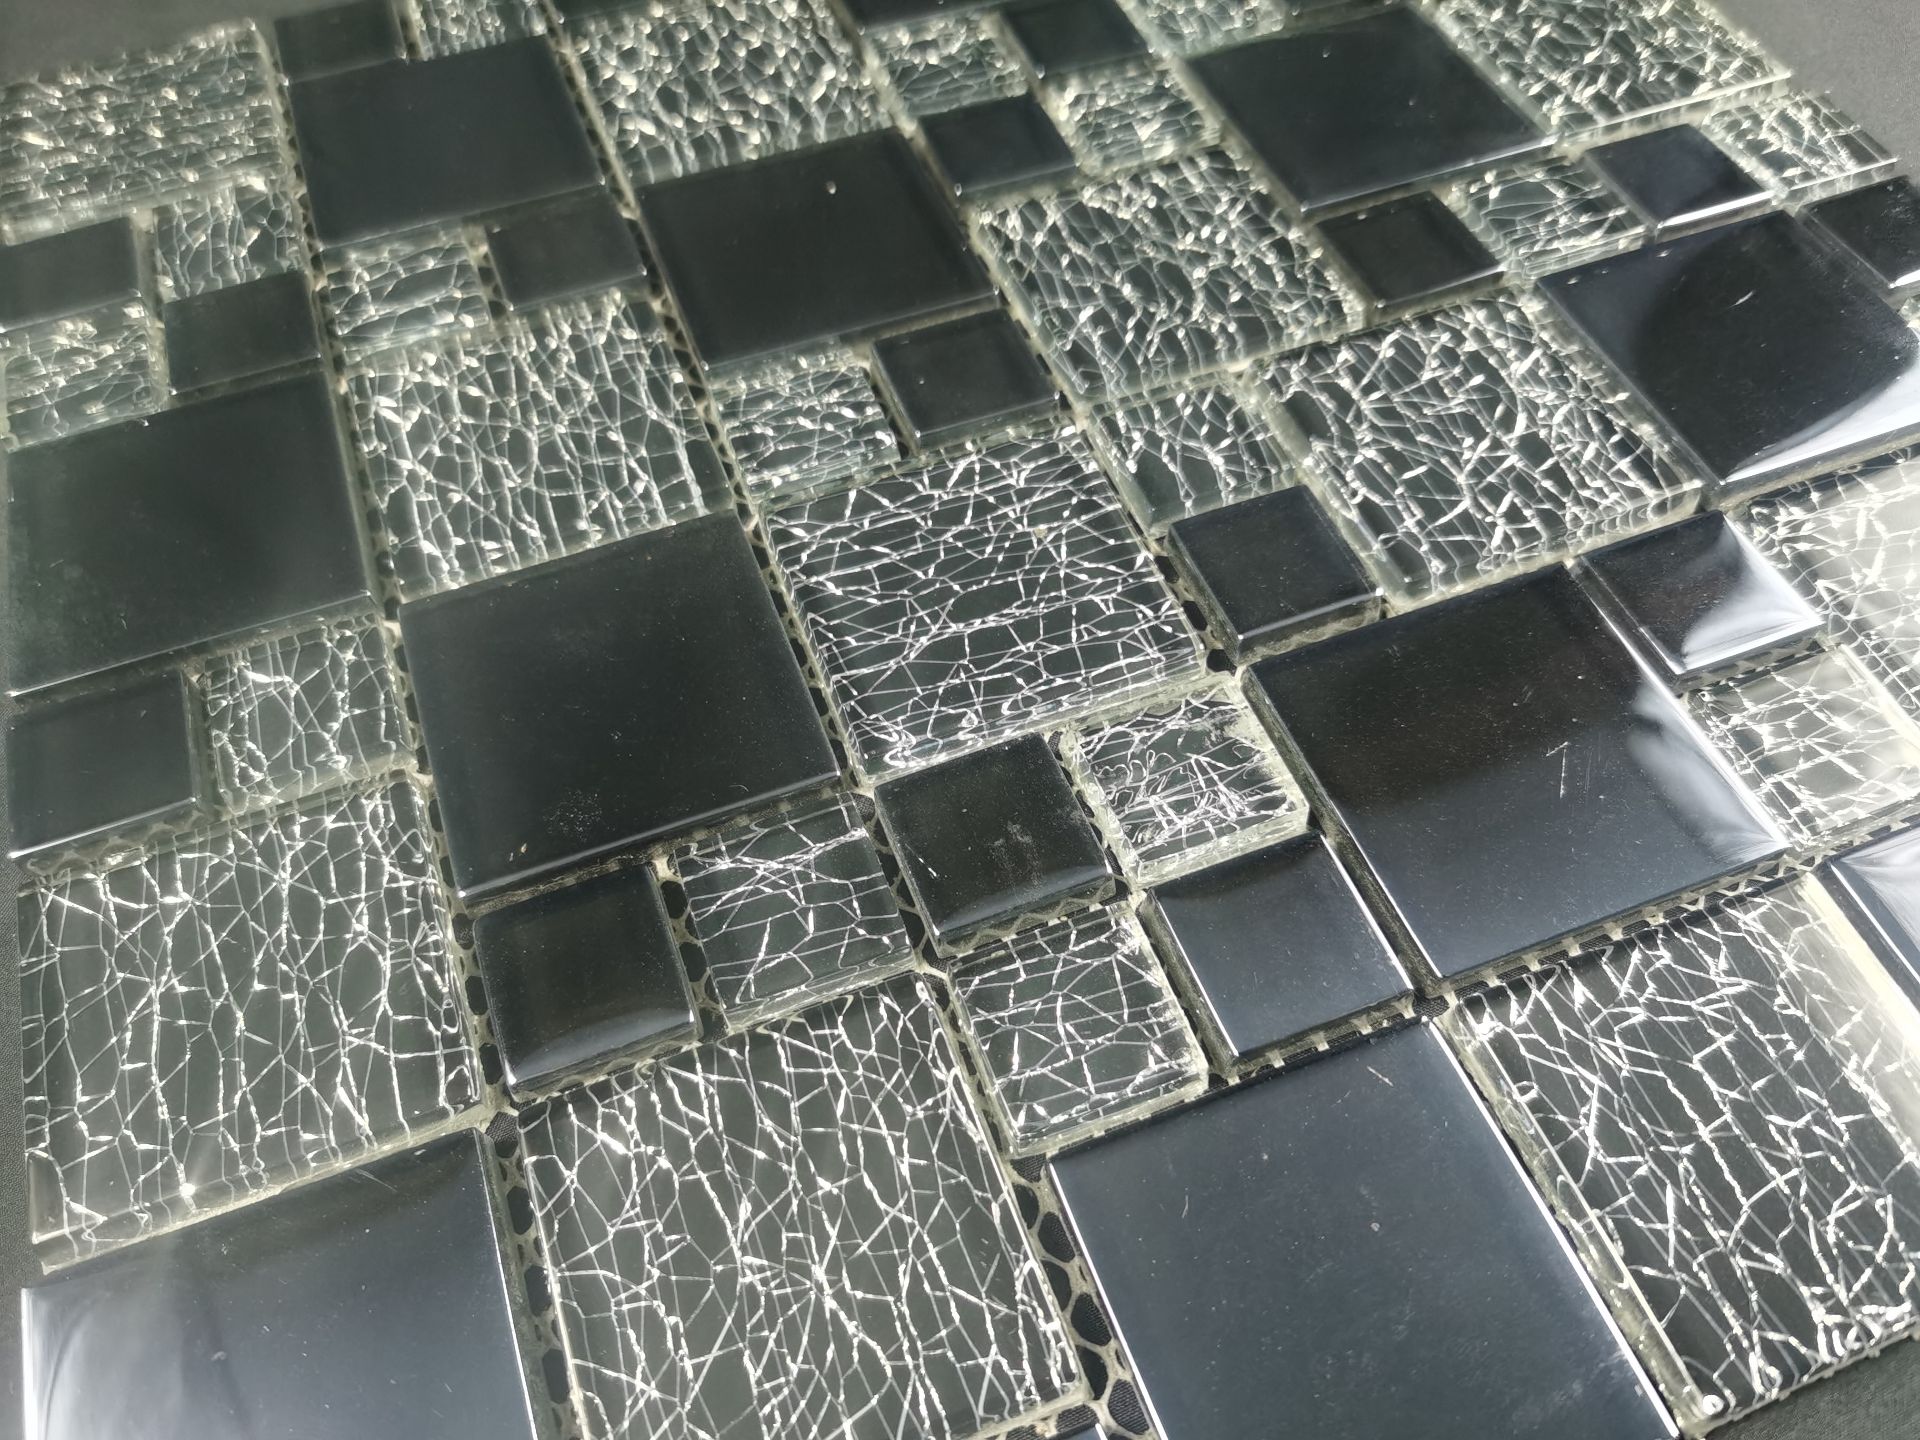 10 Square Metres - High Quality Glass/Stainless Steel Mosaic Tiles -110 Sheets - Image 5 of 5